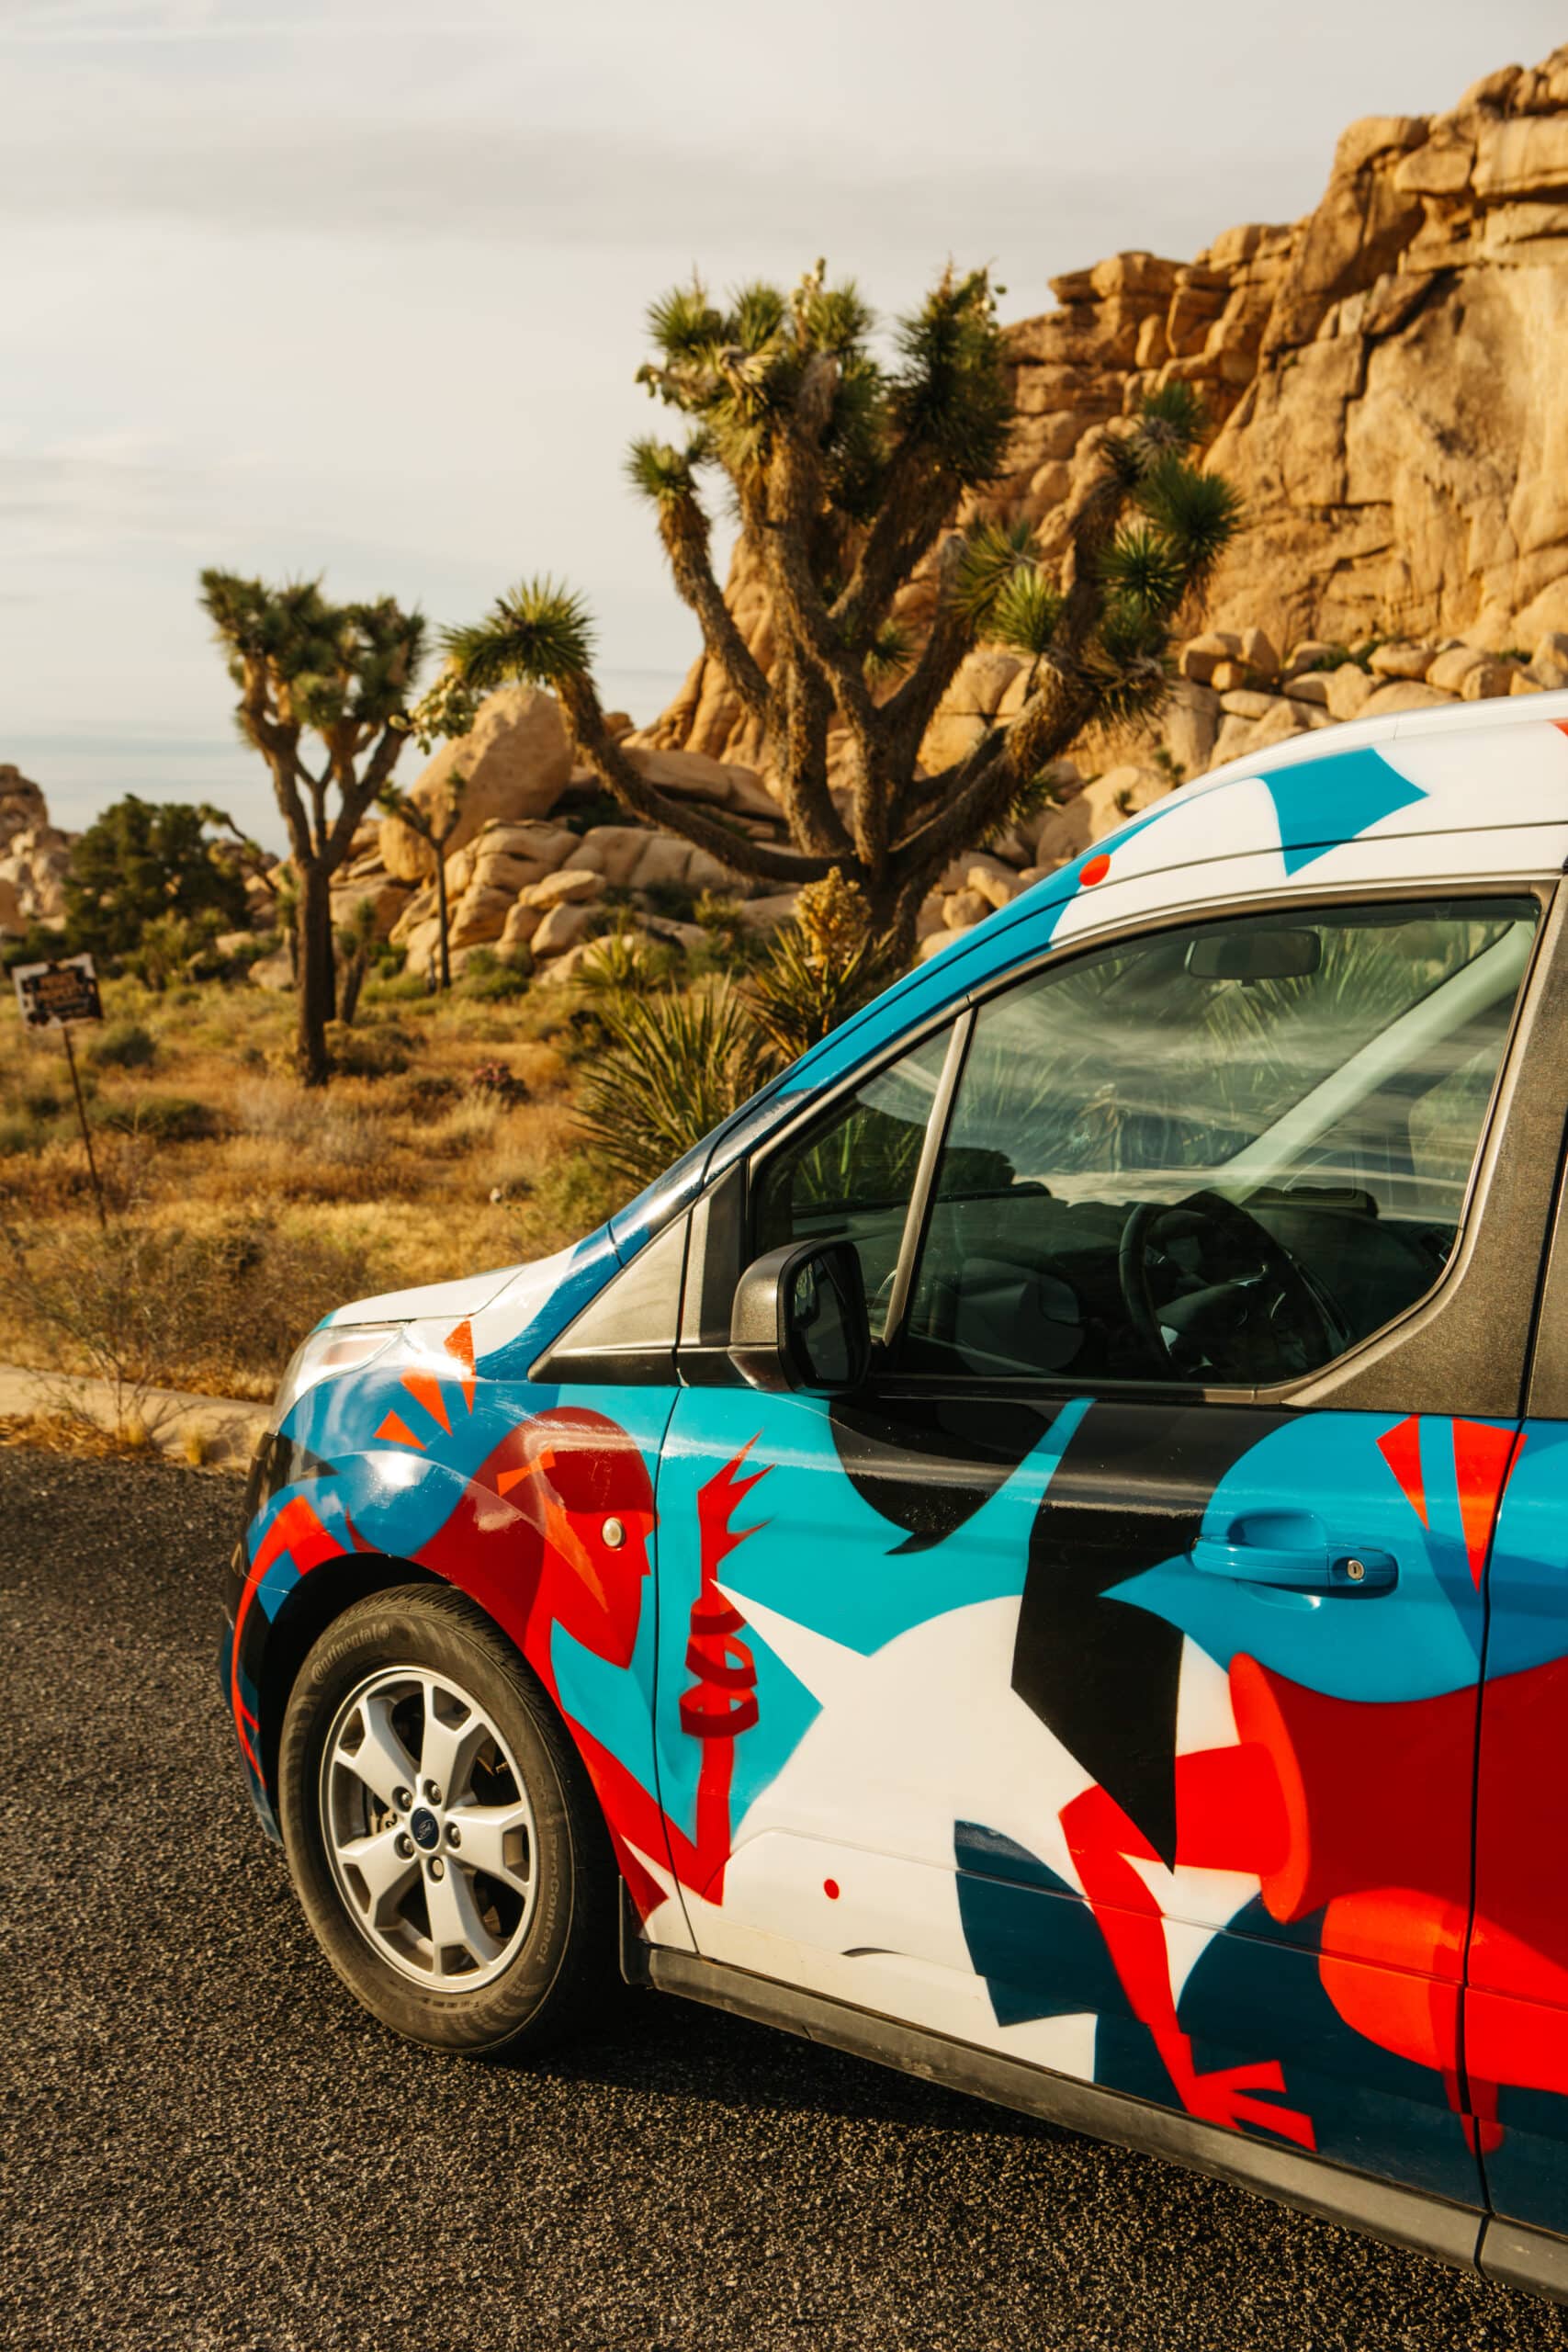 A camper van is the best way to explore California from San Francisco to Joshua Tree National Park